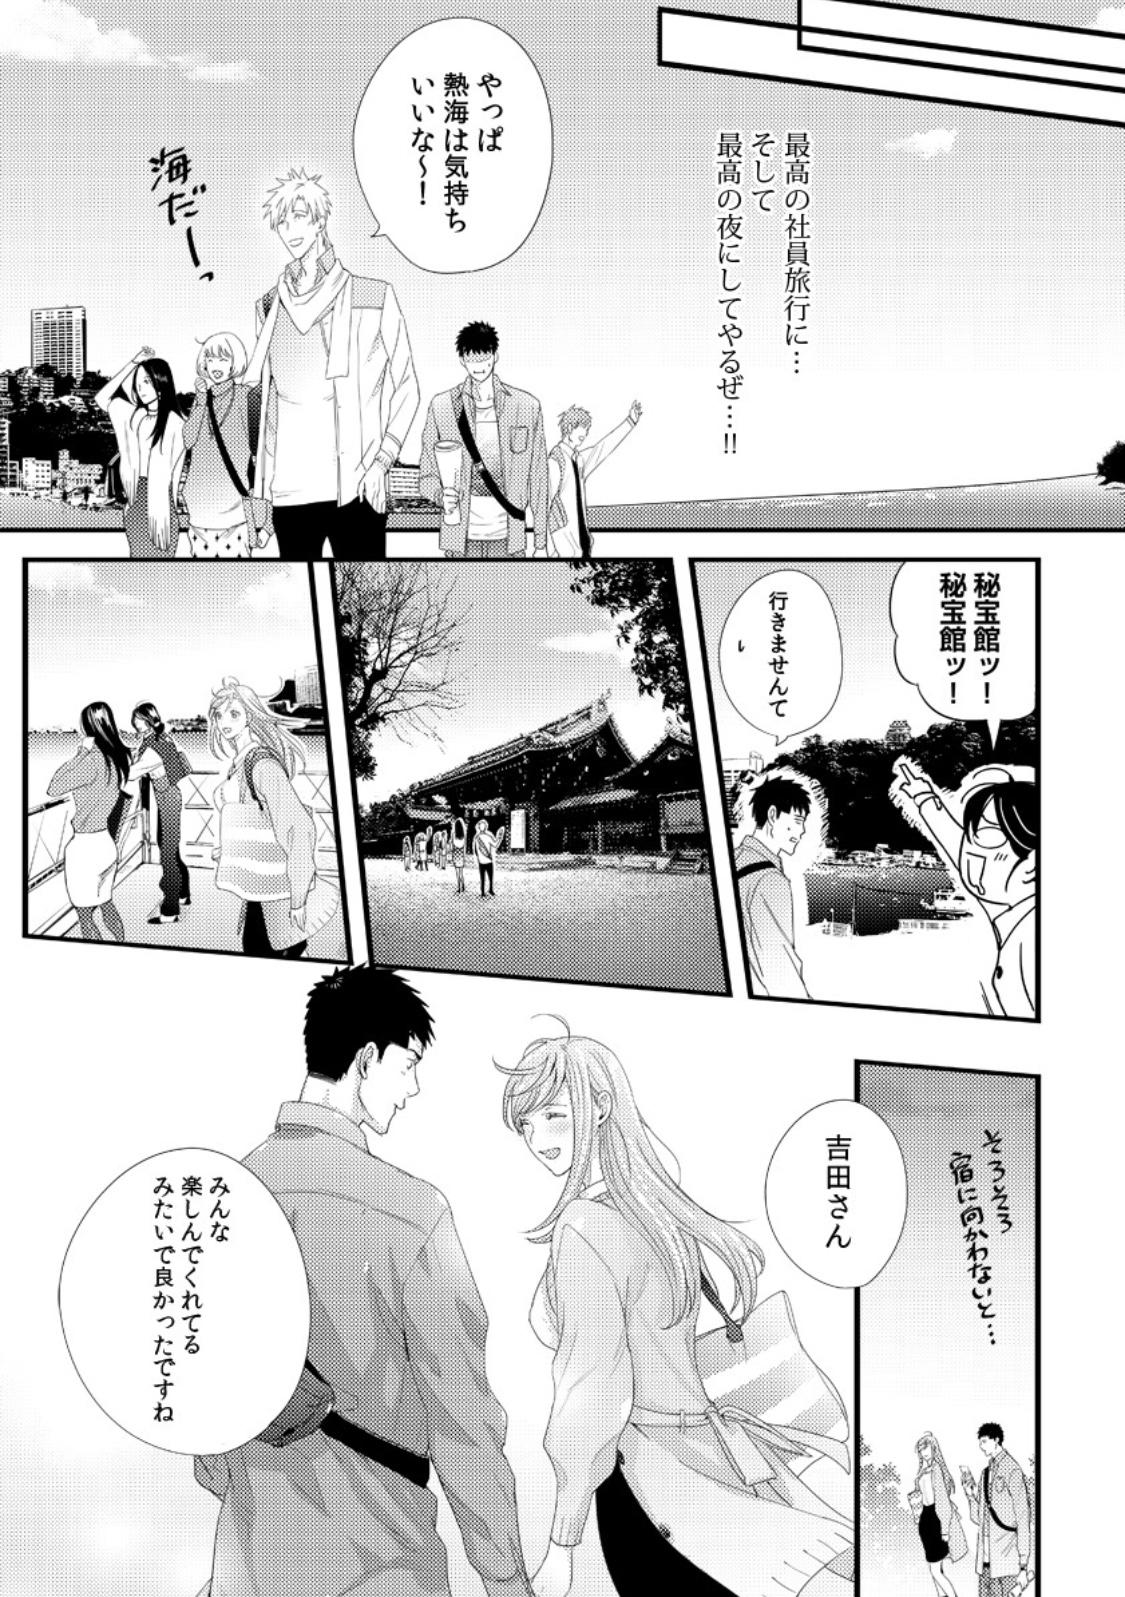 Please Let Me Hold You Futaba-San! Ch. 1+2 8